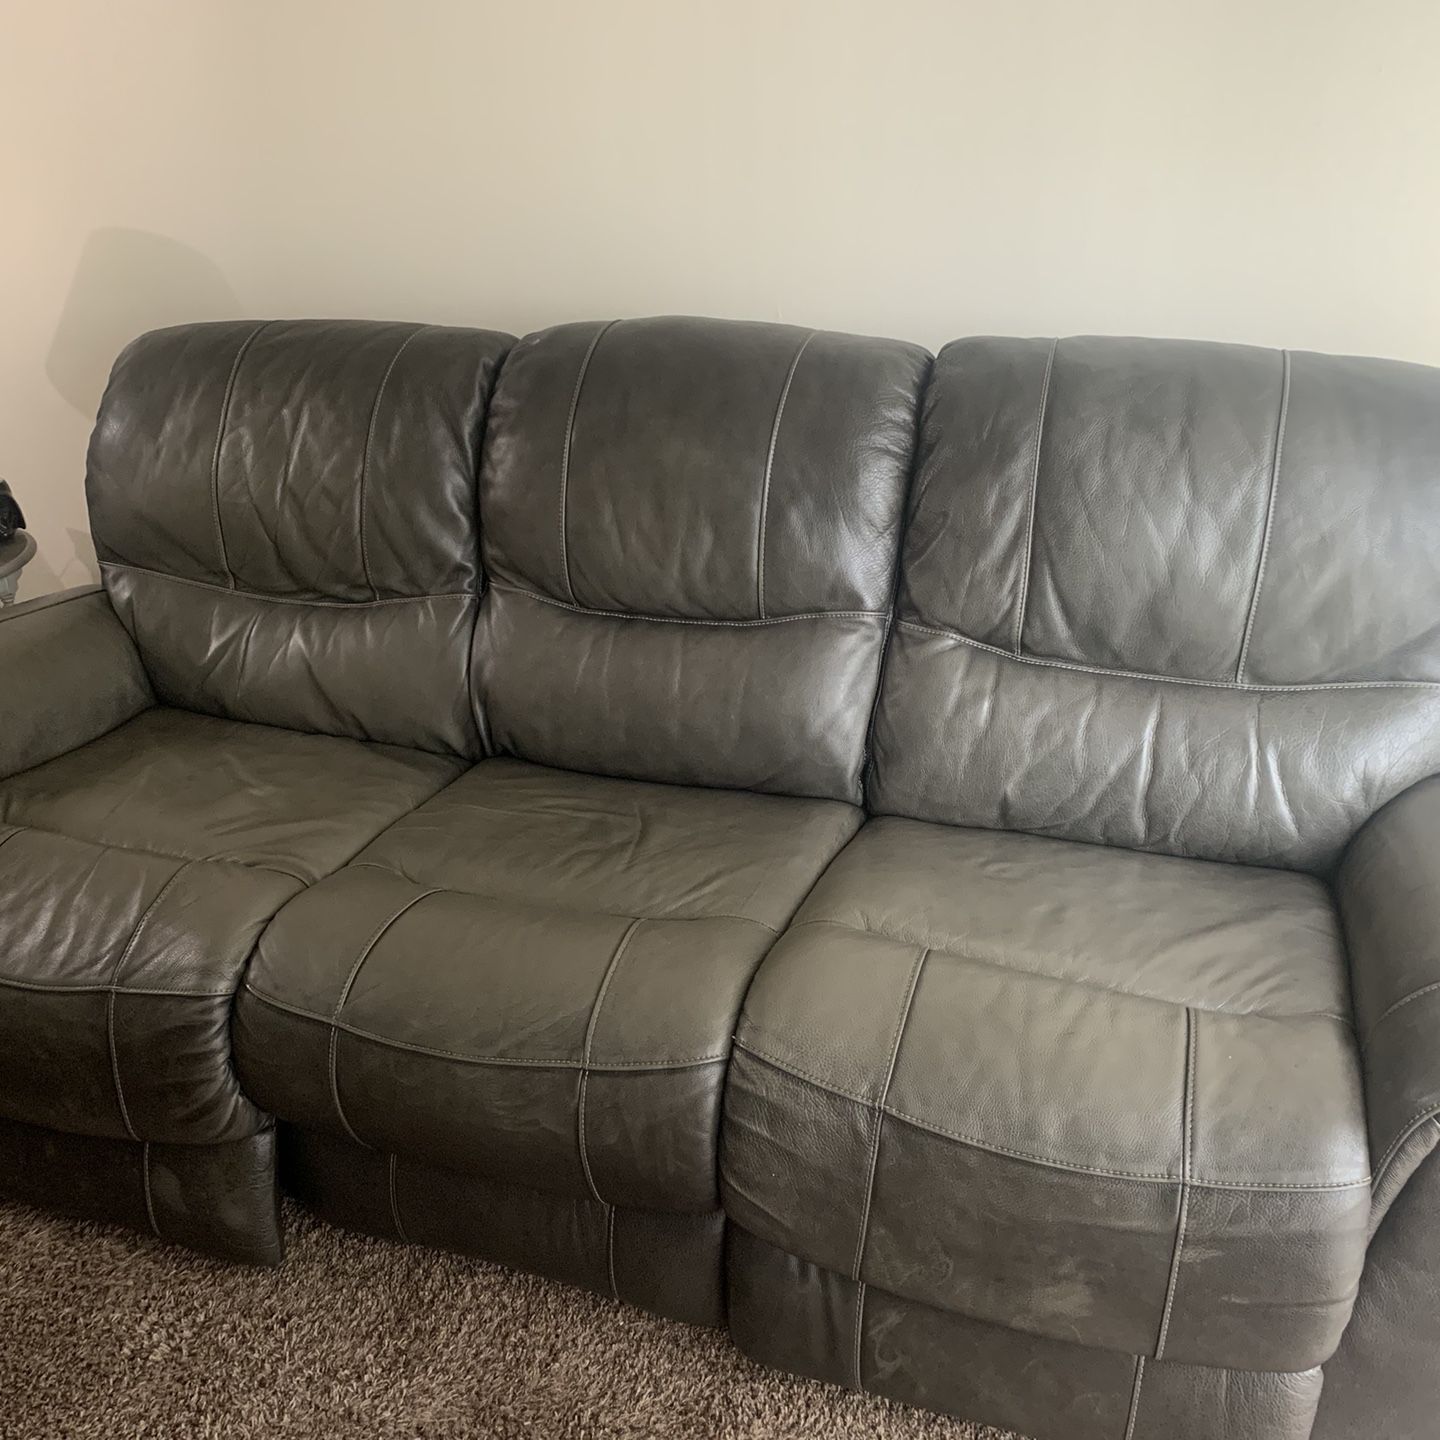 Leather recliner couch